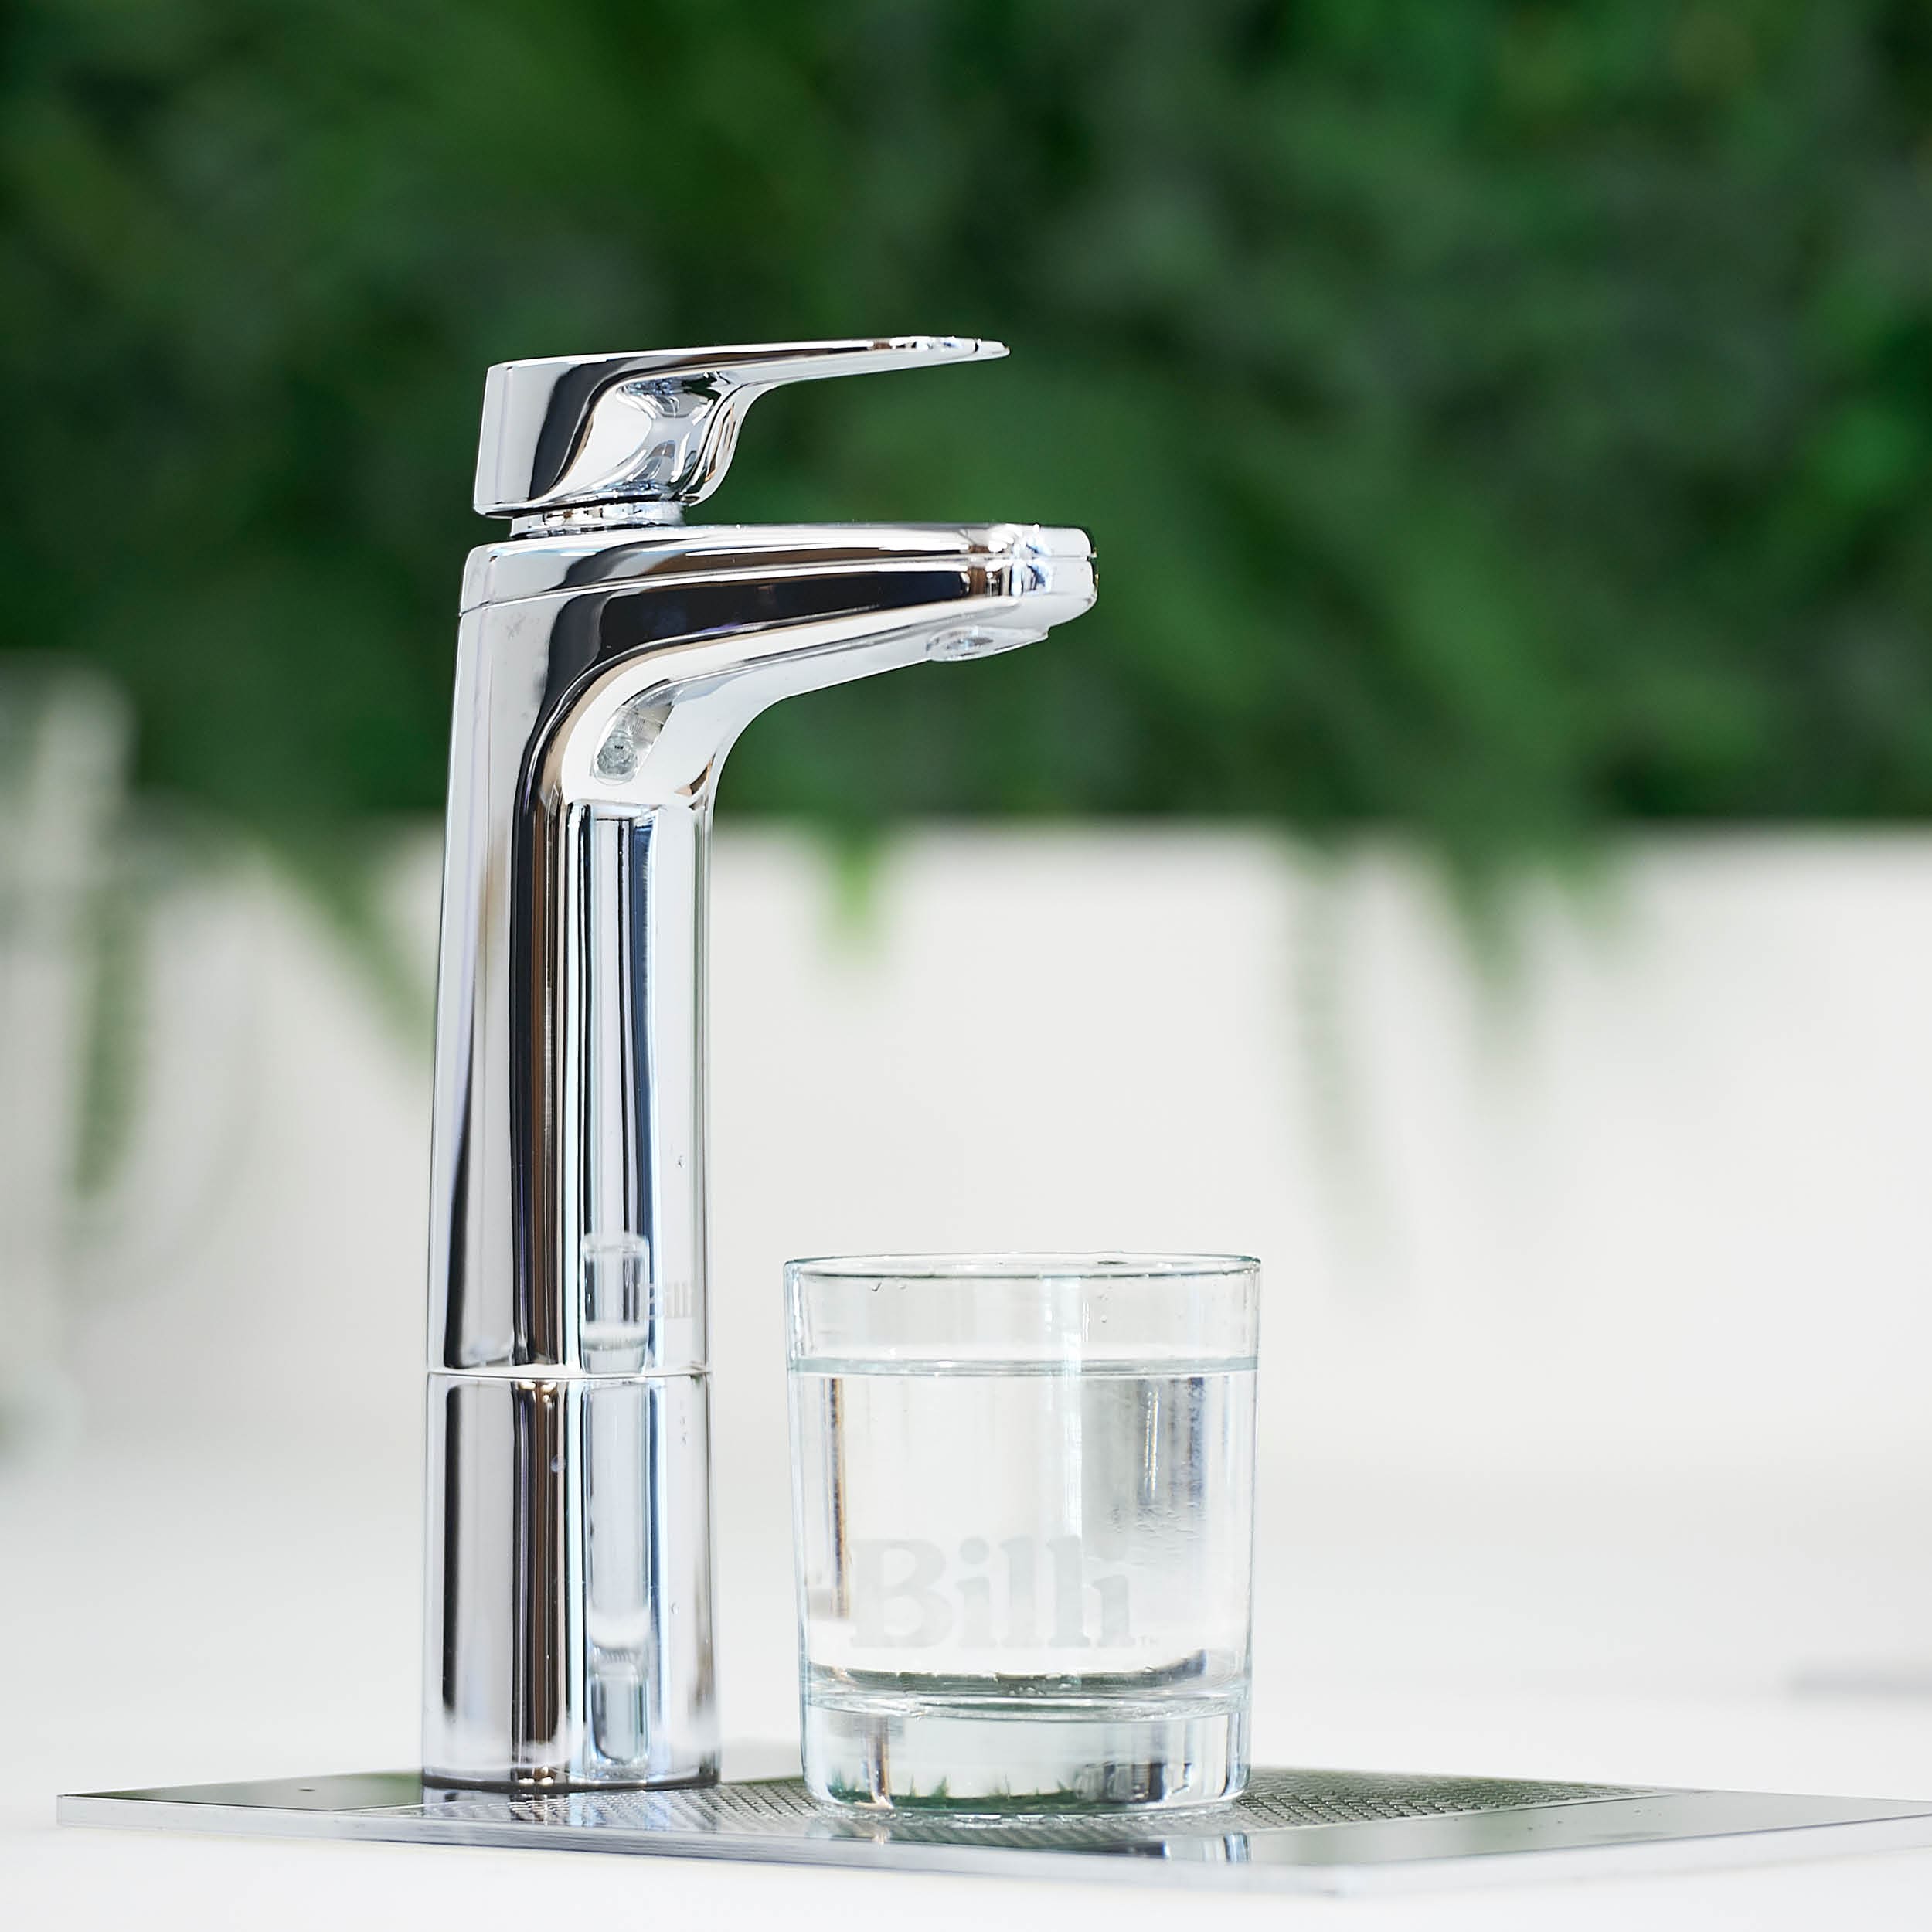 Do You Need To Filter Tap Water? - Billi Australia